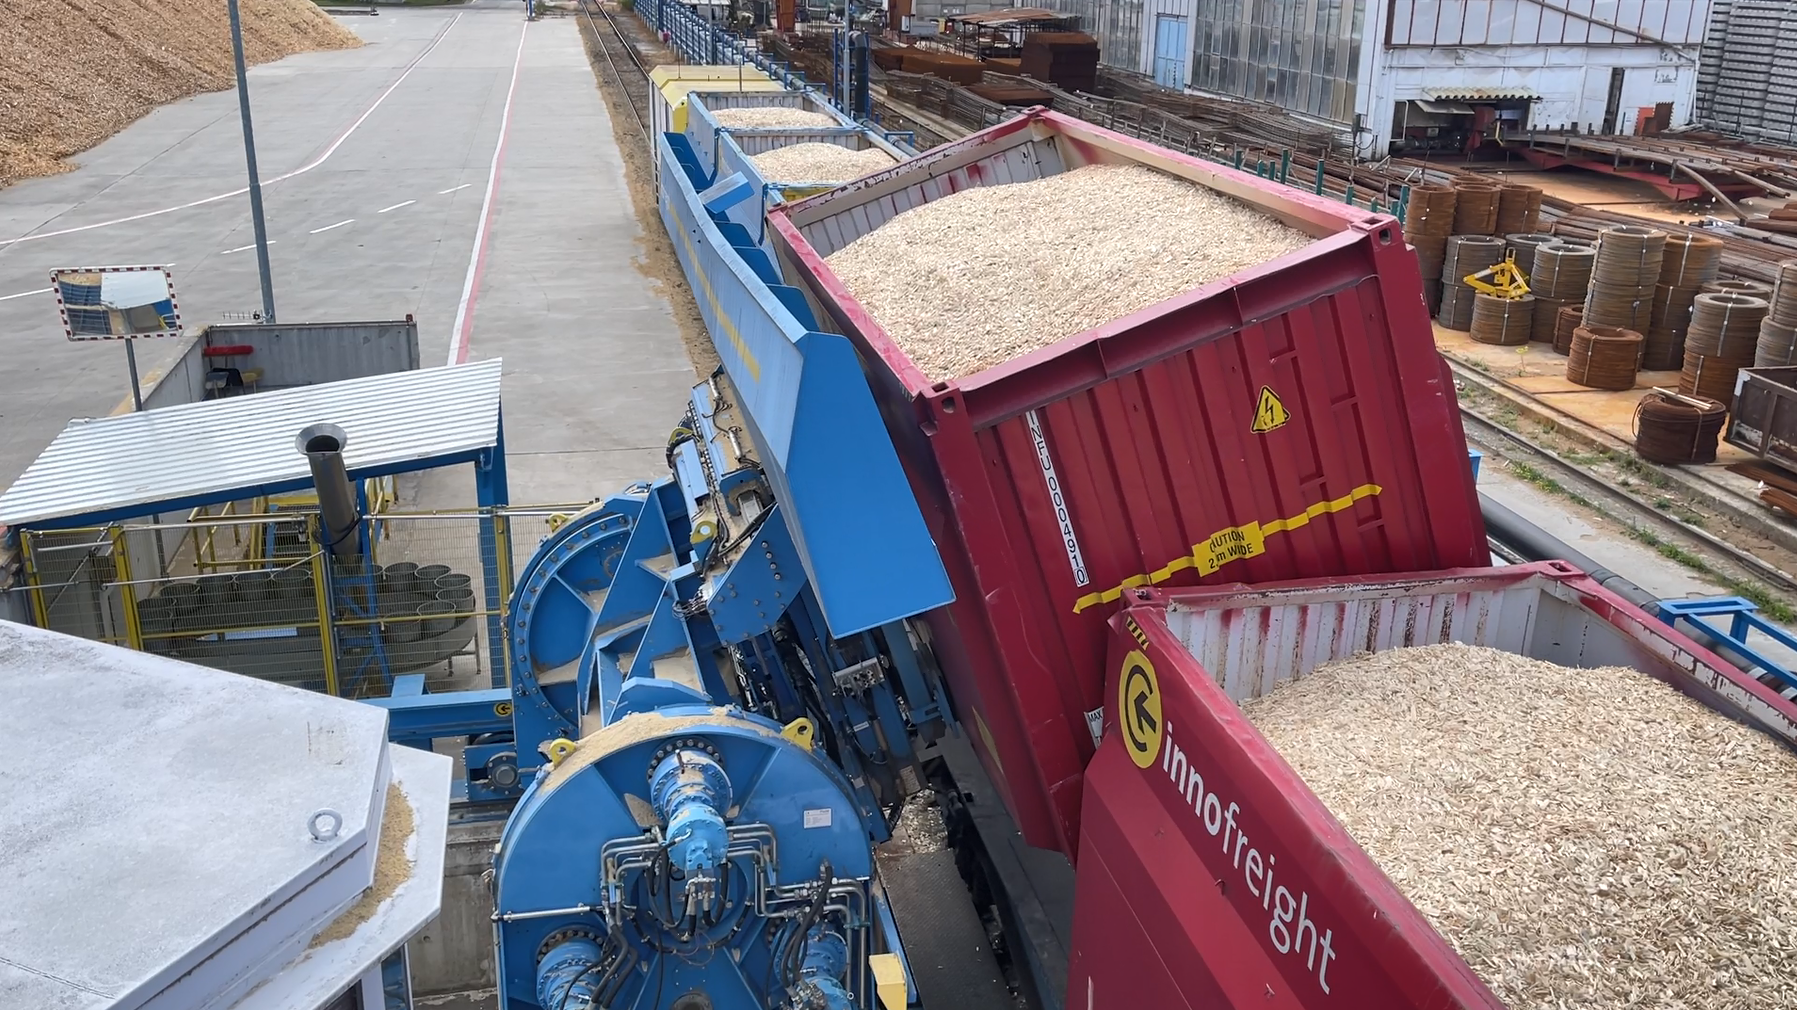 receiving woodchips via train, container tipping machine